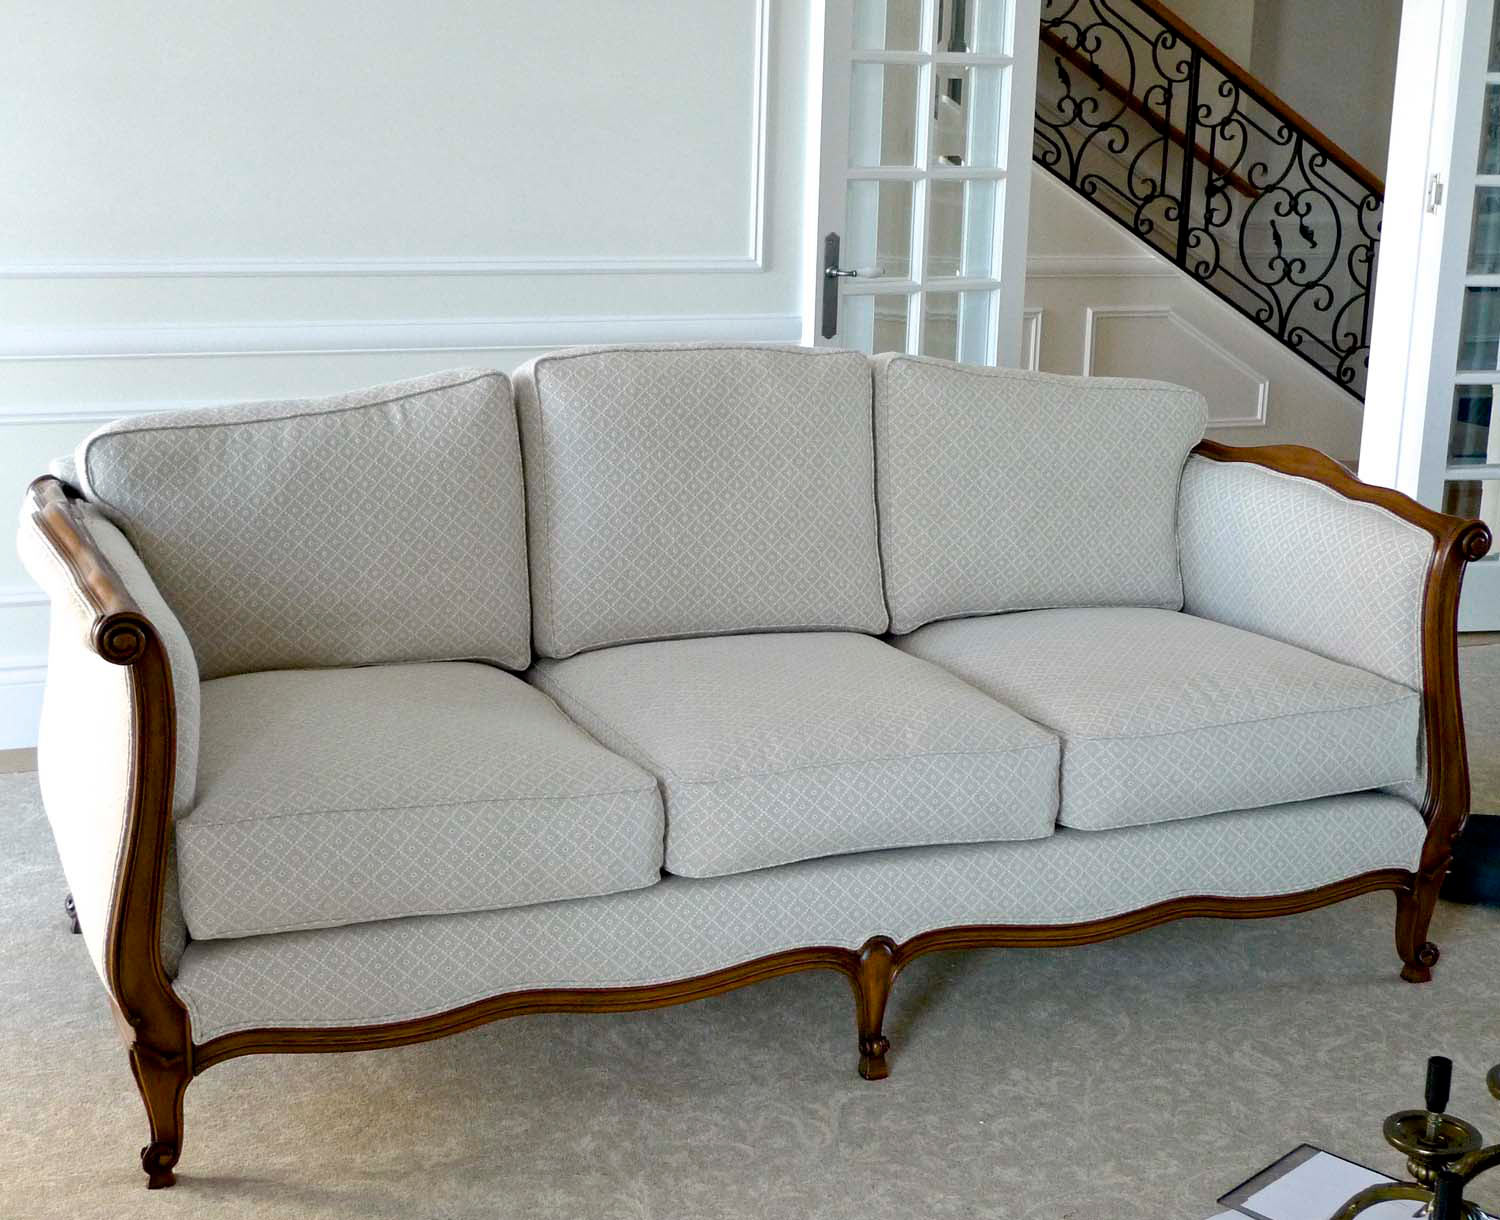 22 French daybeds and classical sofas